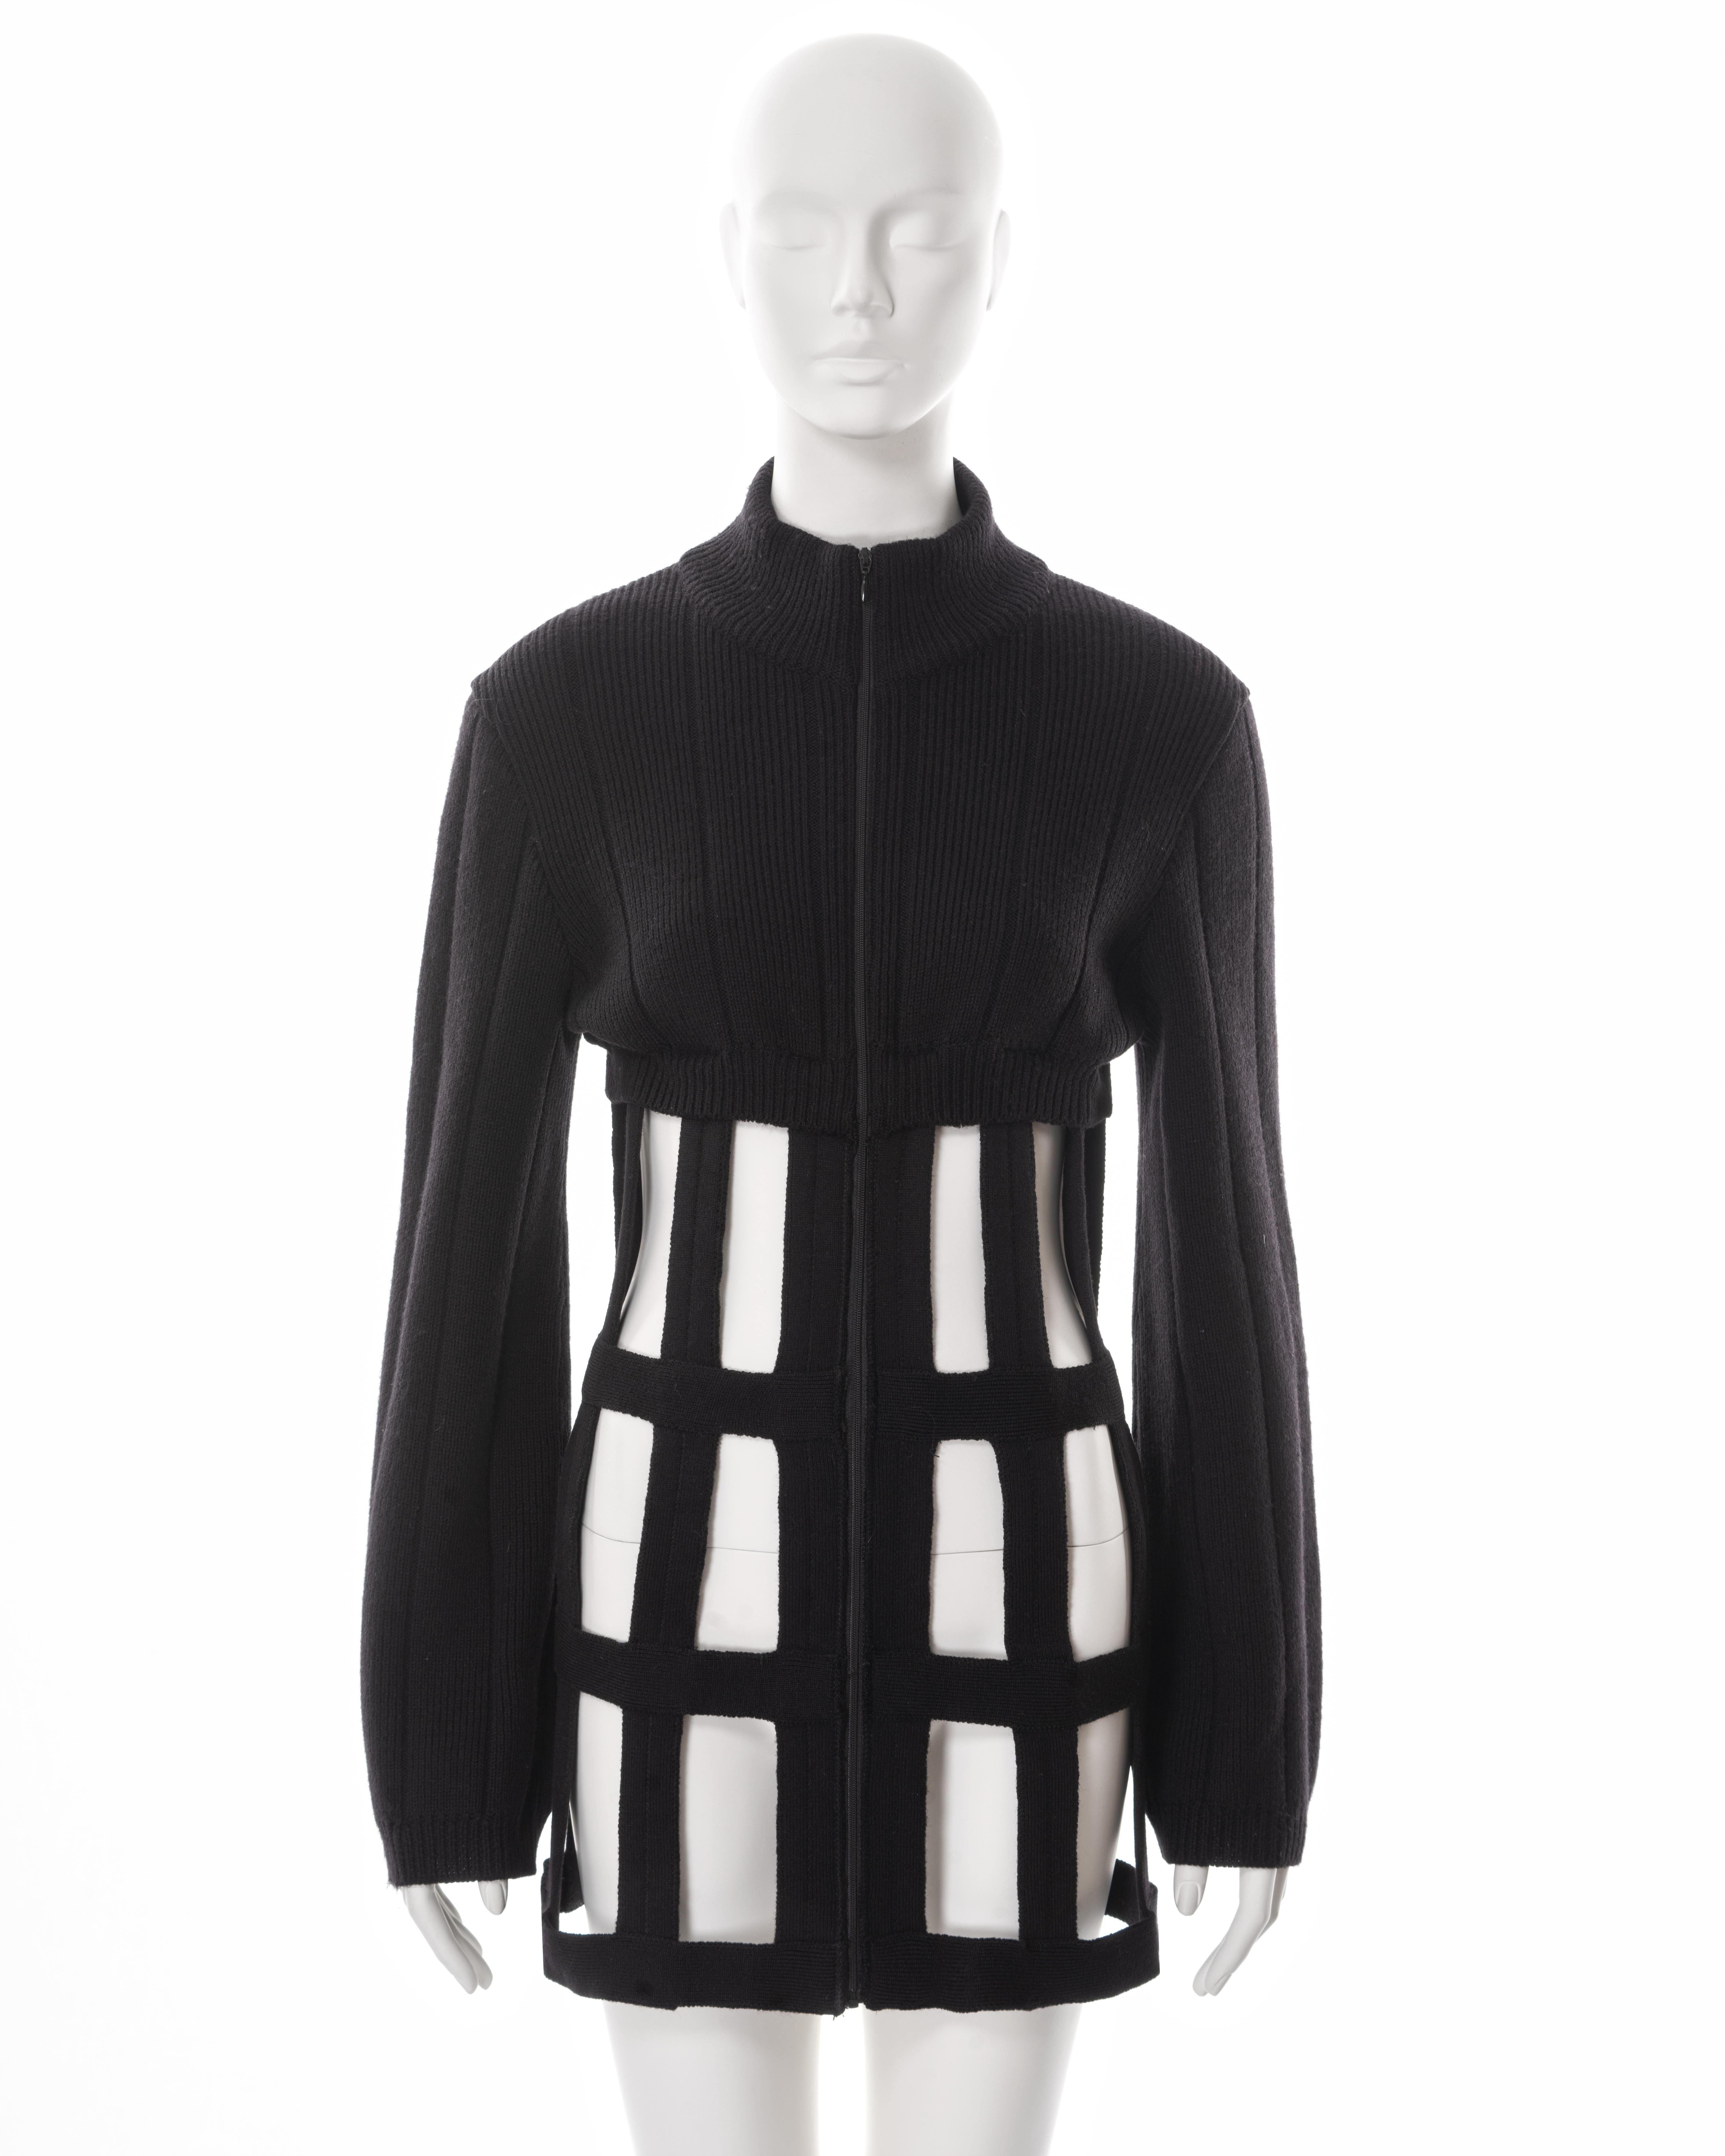 ▪ Jean Paul Gaultier sweater dress
▪ Fall-Winter 1989
▪ Constructed from black ribbed-knit wool 
▪ Turtle neck 
▪ Caged skirt made up of a lattice of corset boning 
▪ Centre-front zipper 
▪ Long sleeves 
▪ IT 42 - FR 38 - UK 10 - US 6
▪ Made in